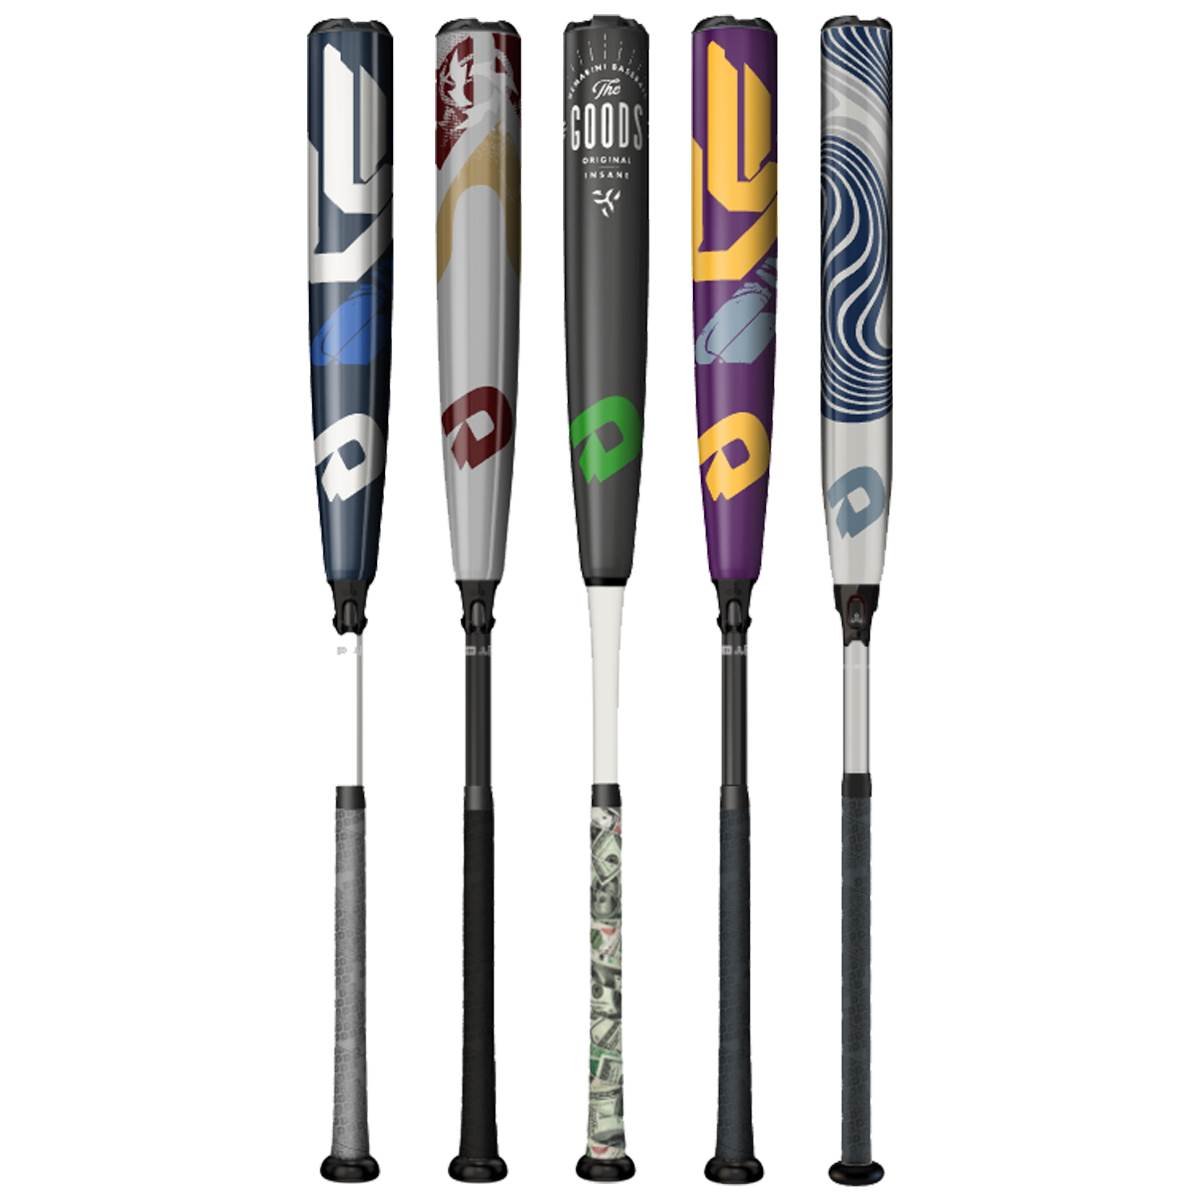 What is the hottest BBCOR Baseball bat